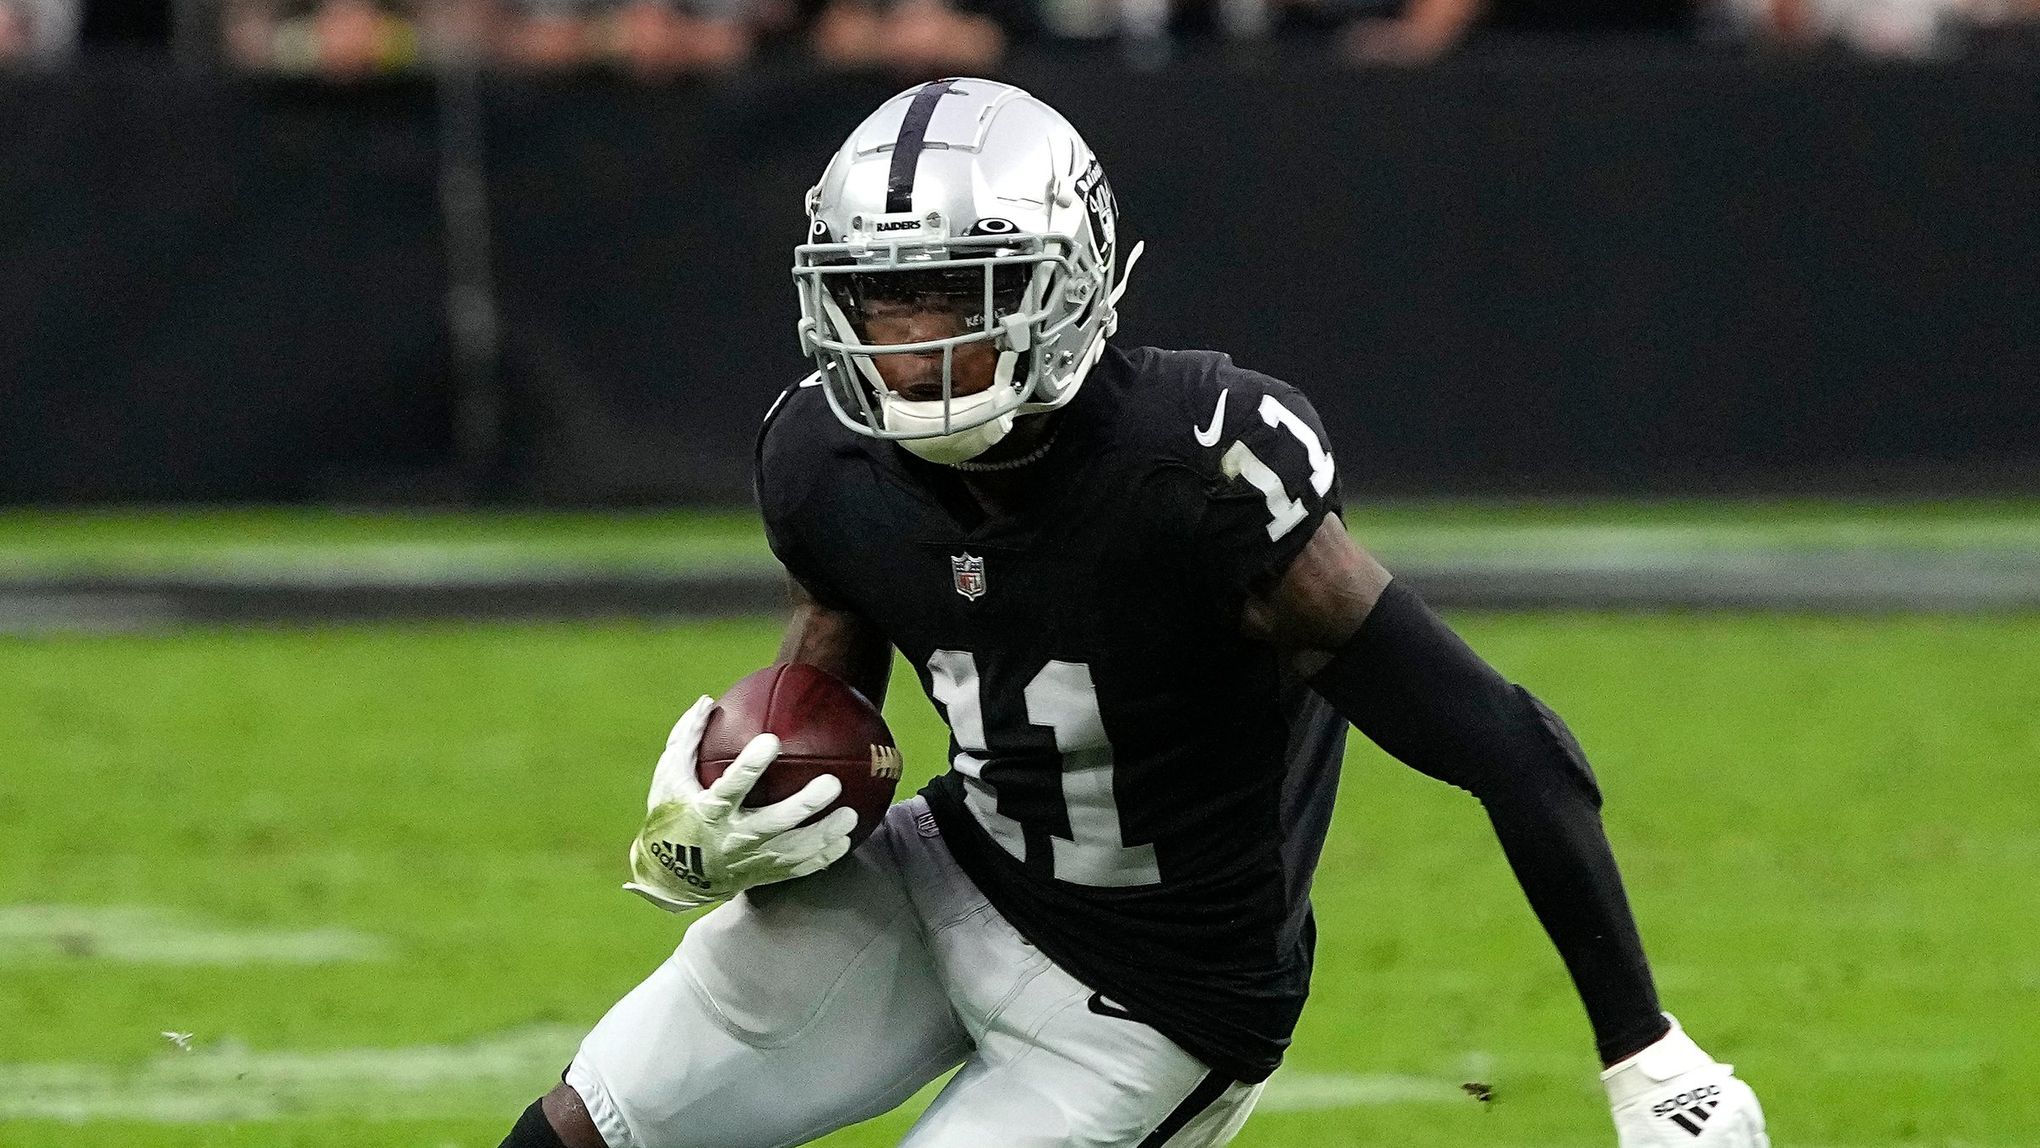 Players, media react to Raiders' 2021 schedule reveal